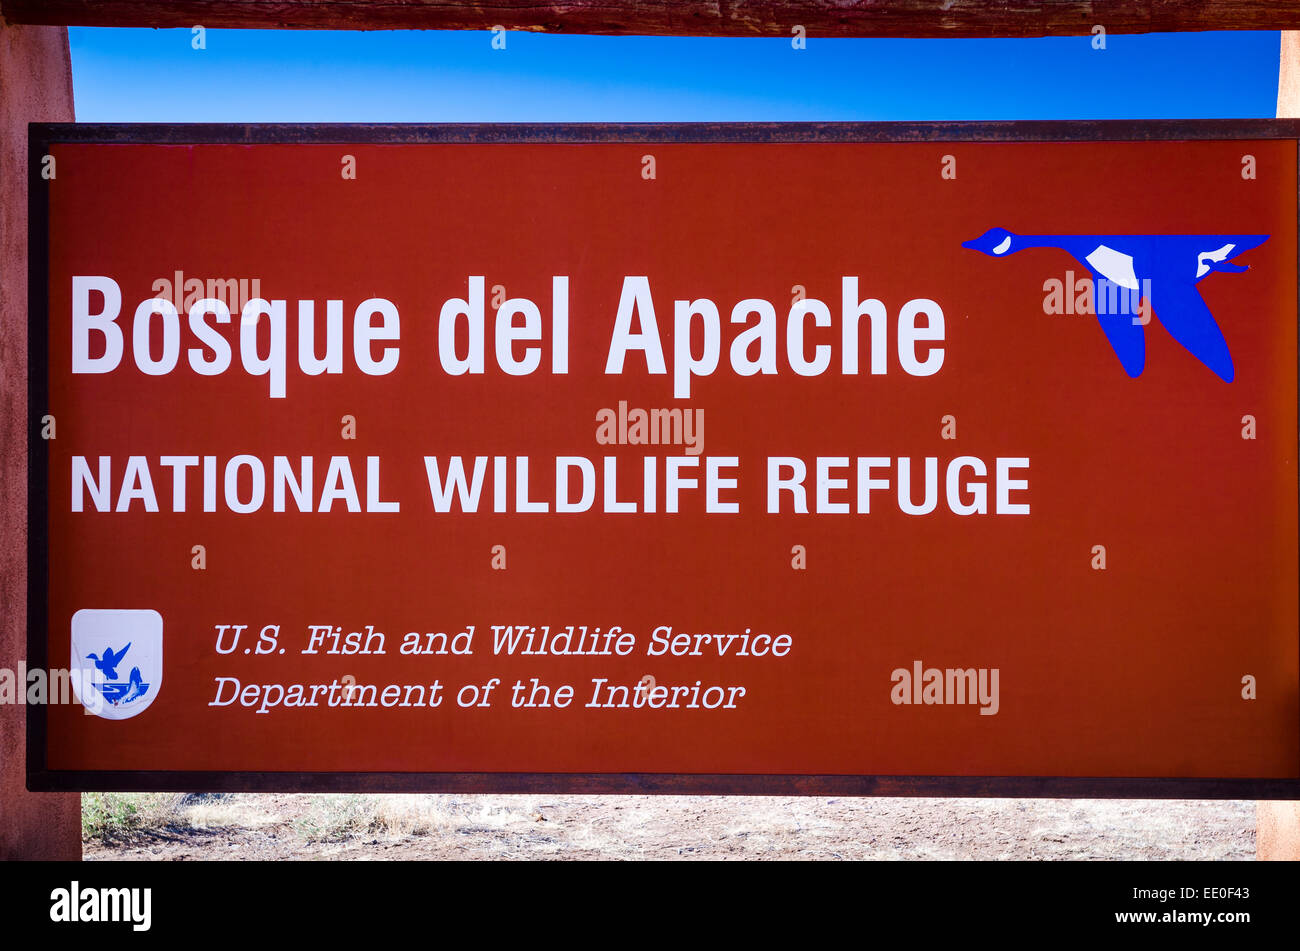 Entrance sign at Bosque del Apache National Wildlife Refuge, New Mexico USA Stock Photo